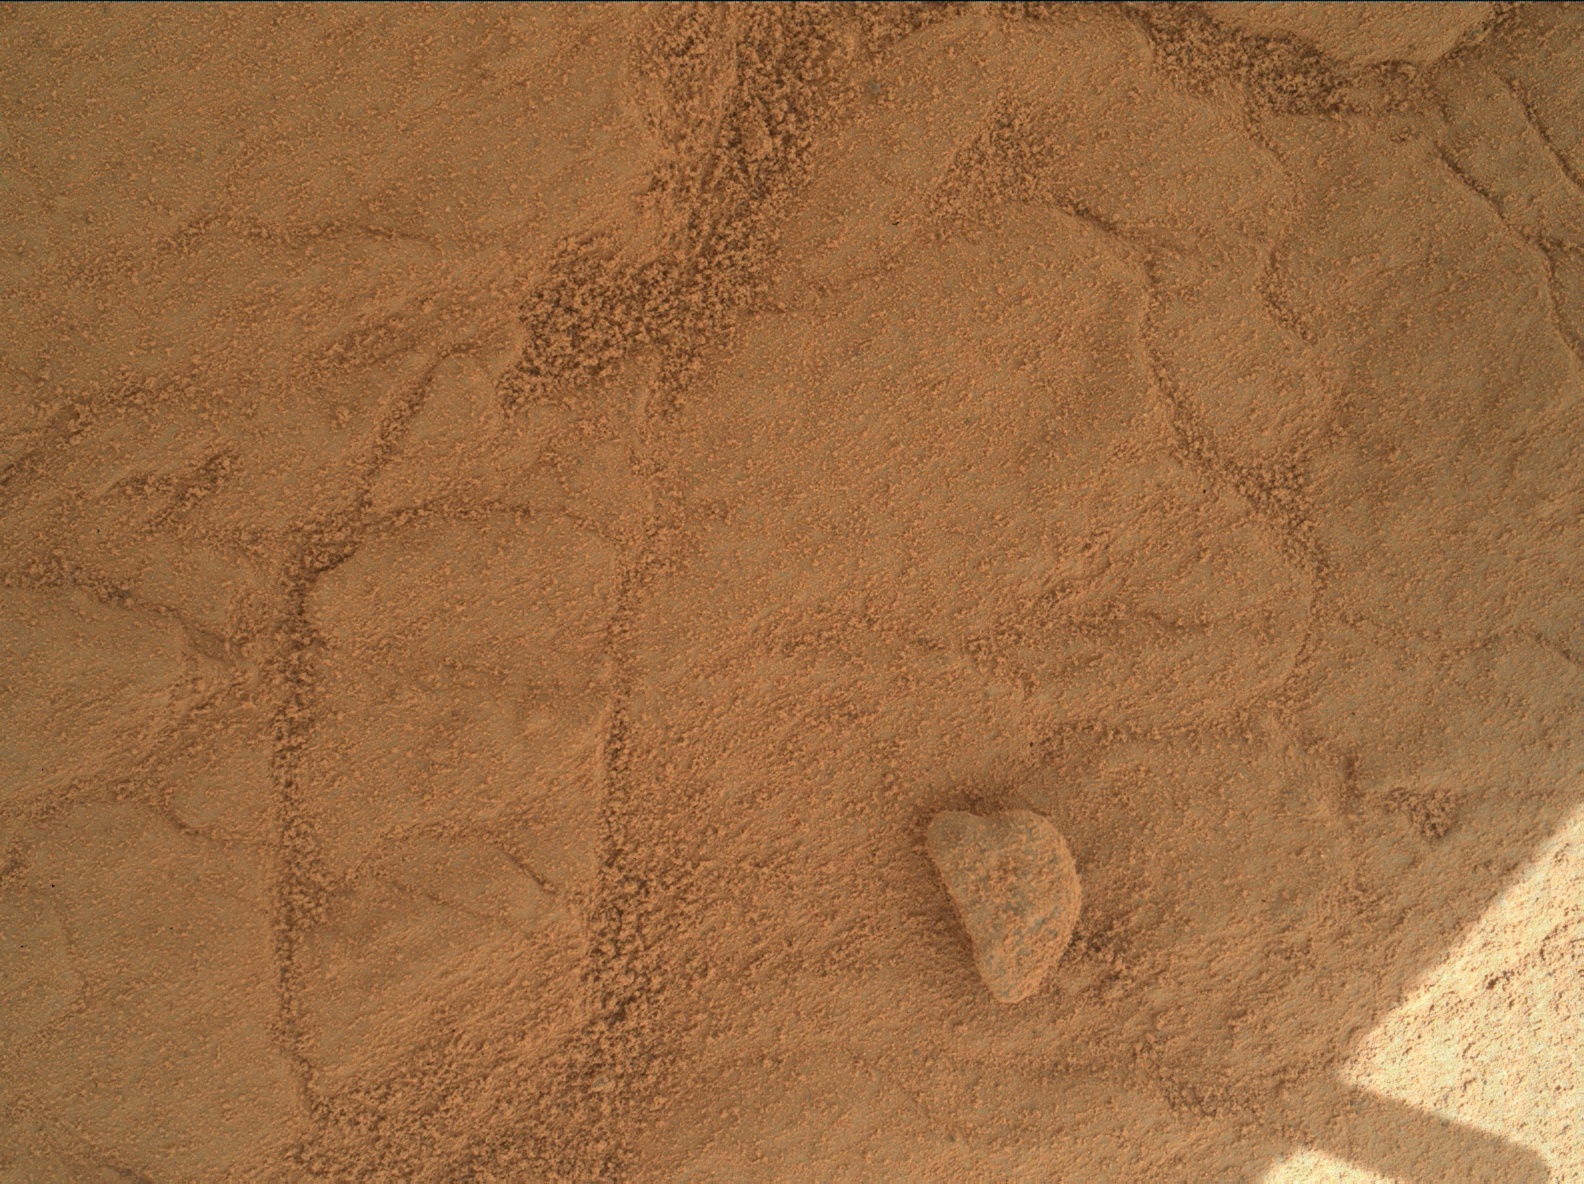 Nasa's Mars rover Curiosity acquired this image using its Mars Hand Lens Imager (MAHLI) on Sol 150